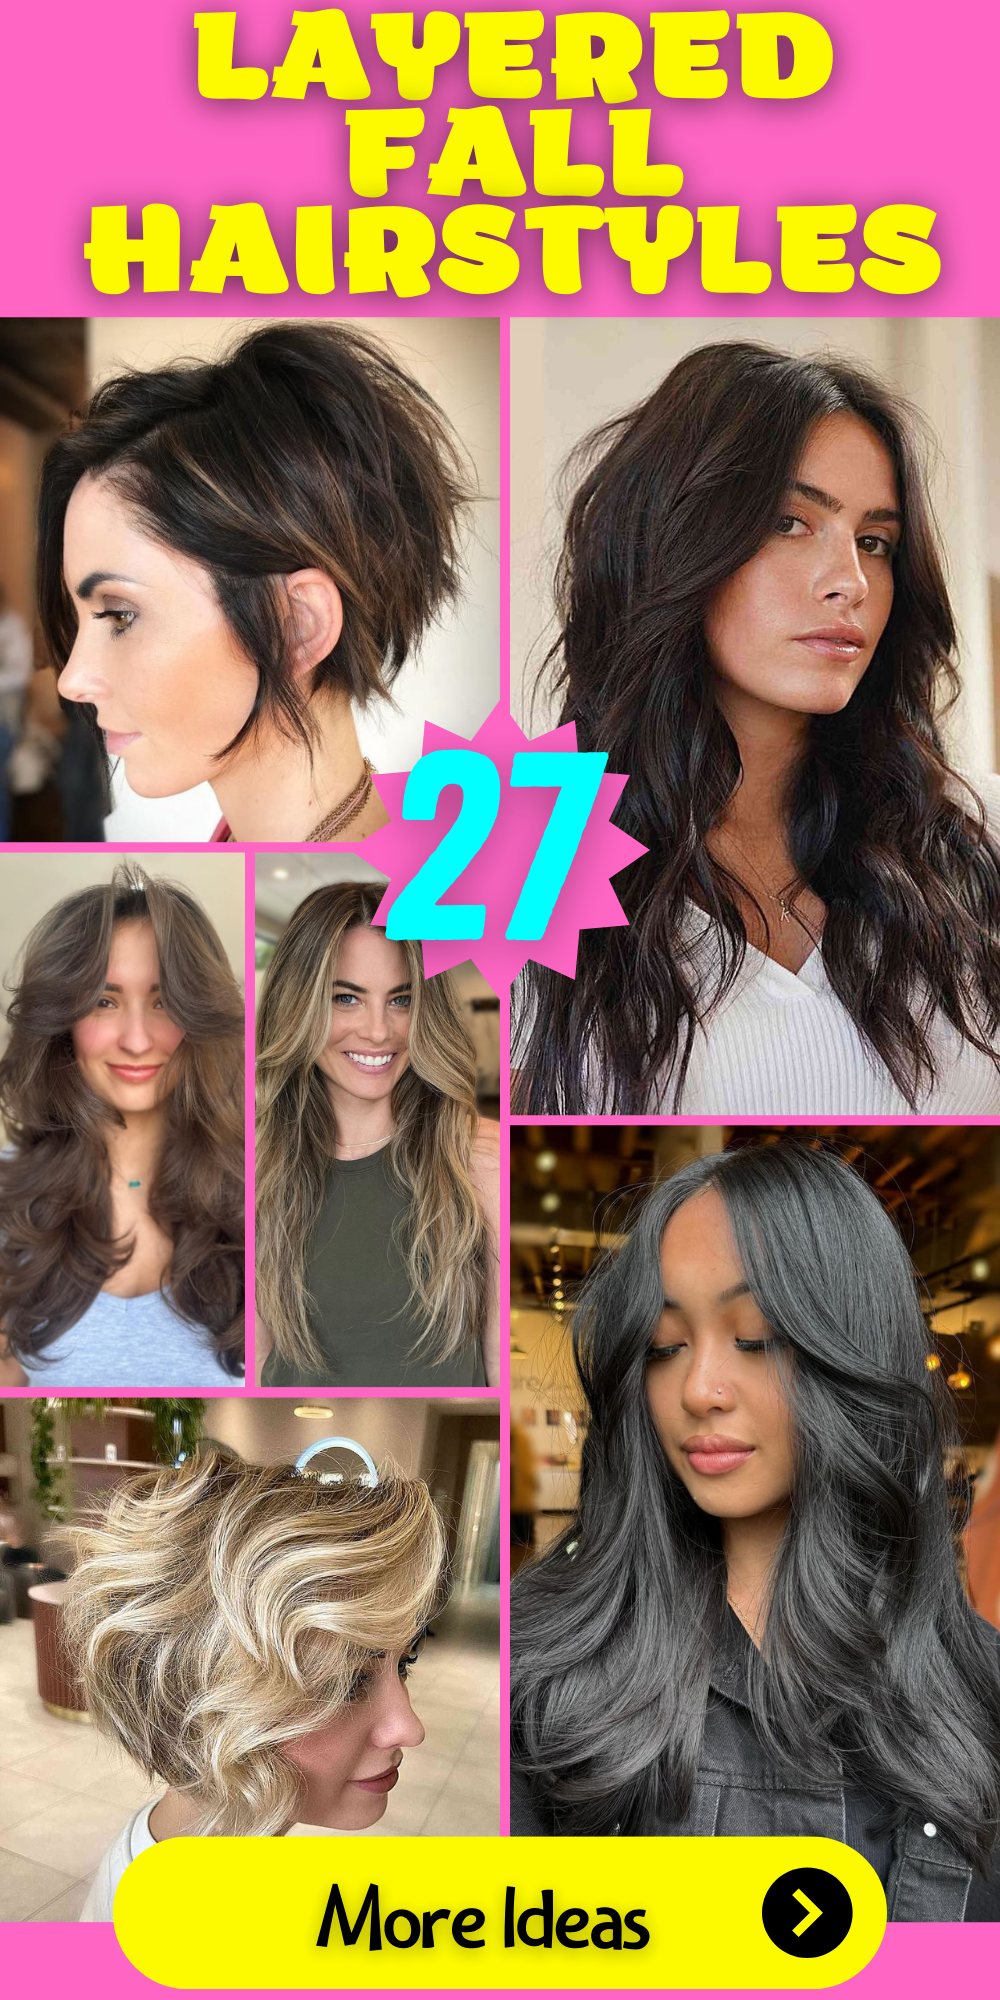 27 Layered Fall Hairstyles to Inspire You This Season